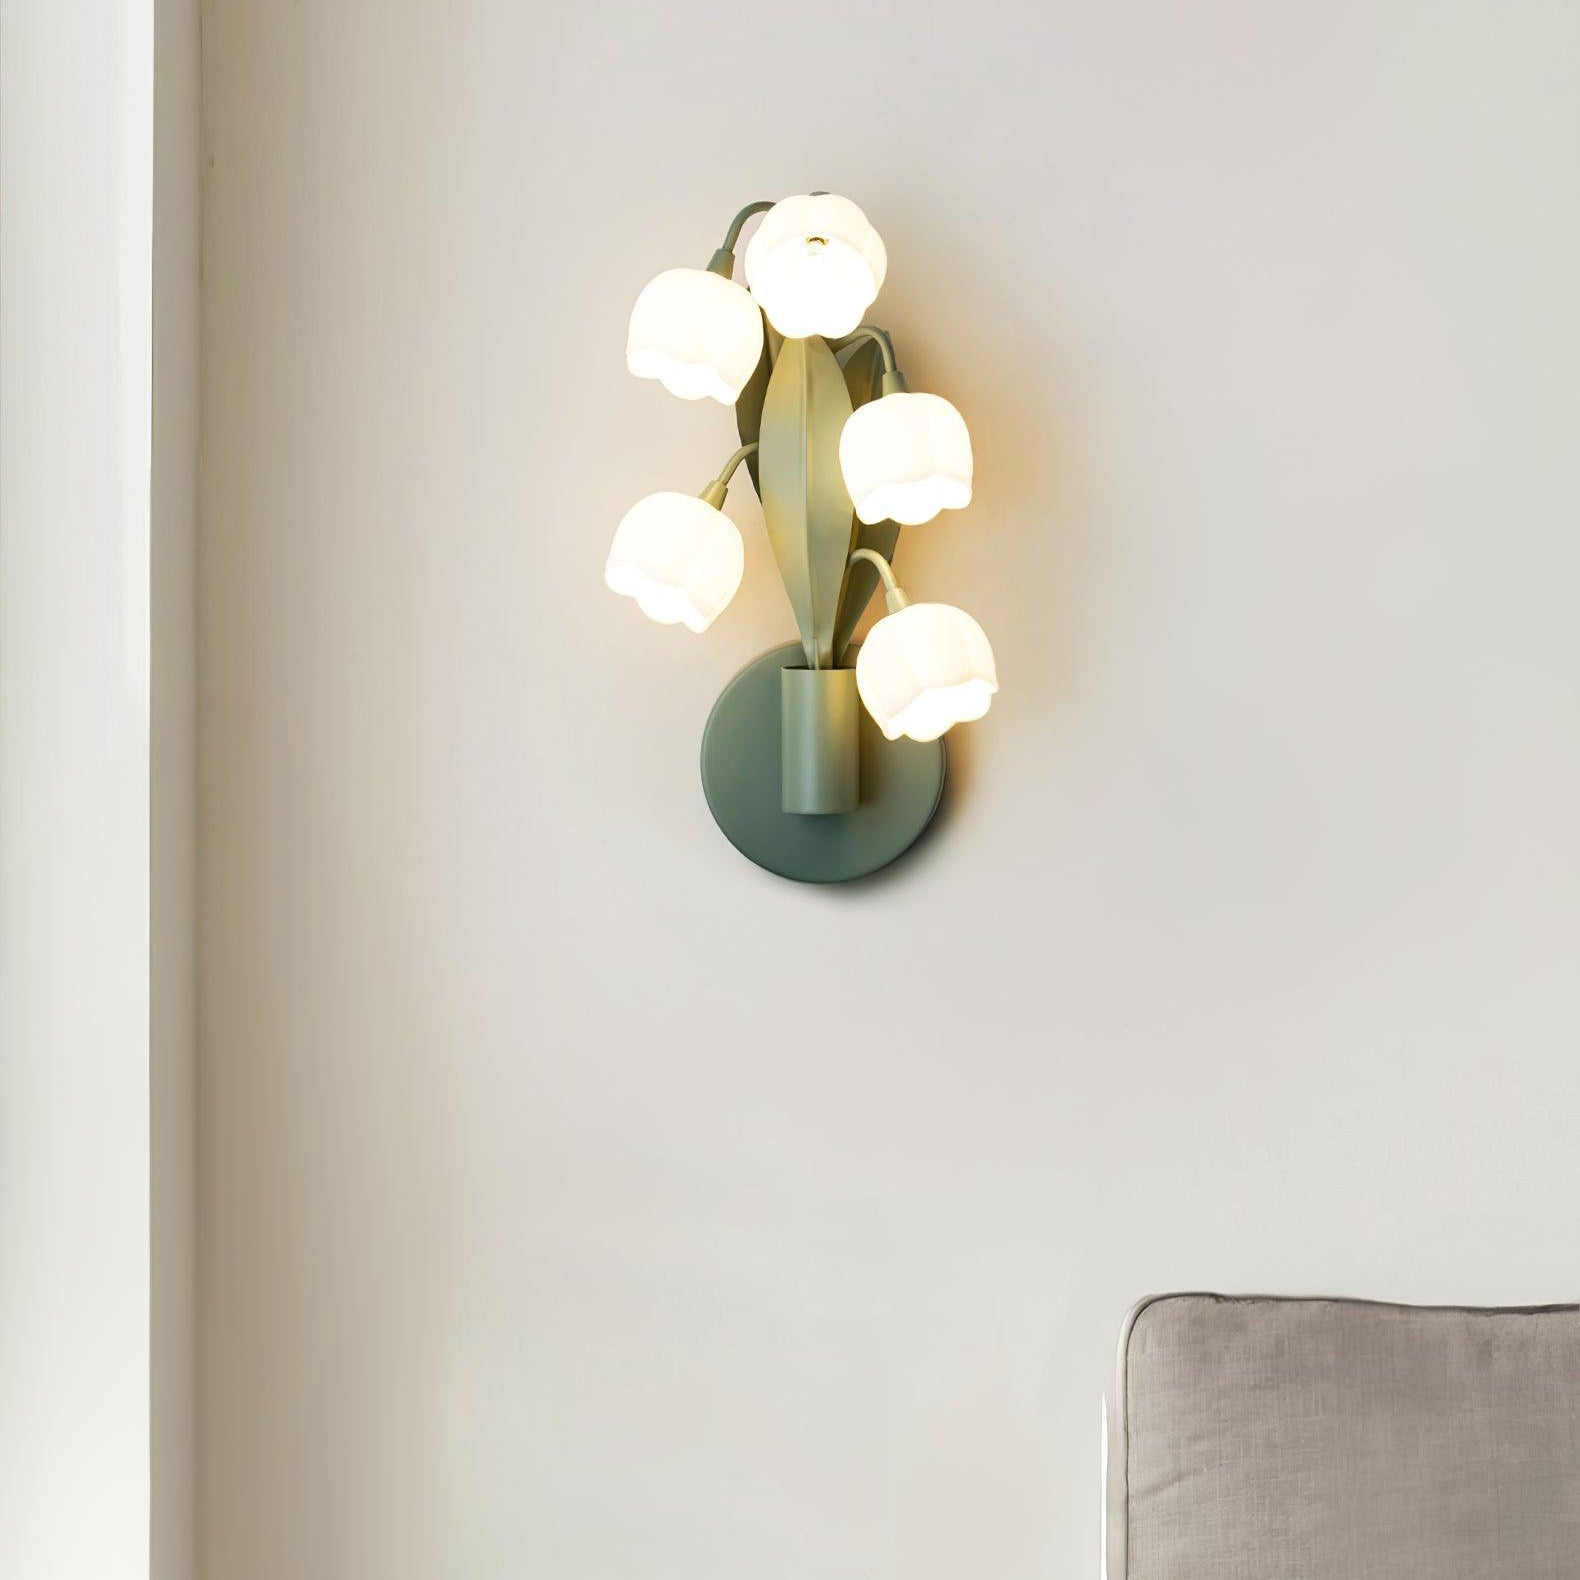 Elegant Illumination with Sara Orchid Lamps – Blending Design and Functionality